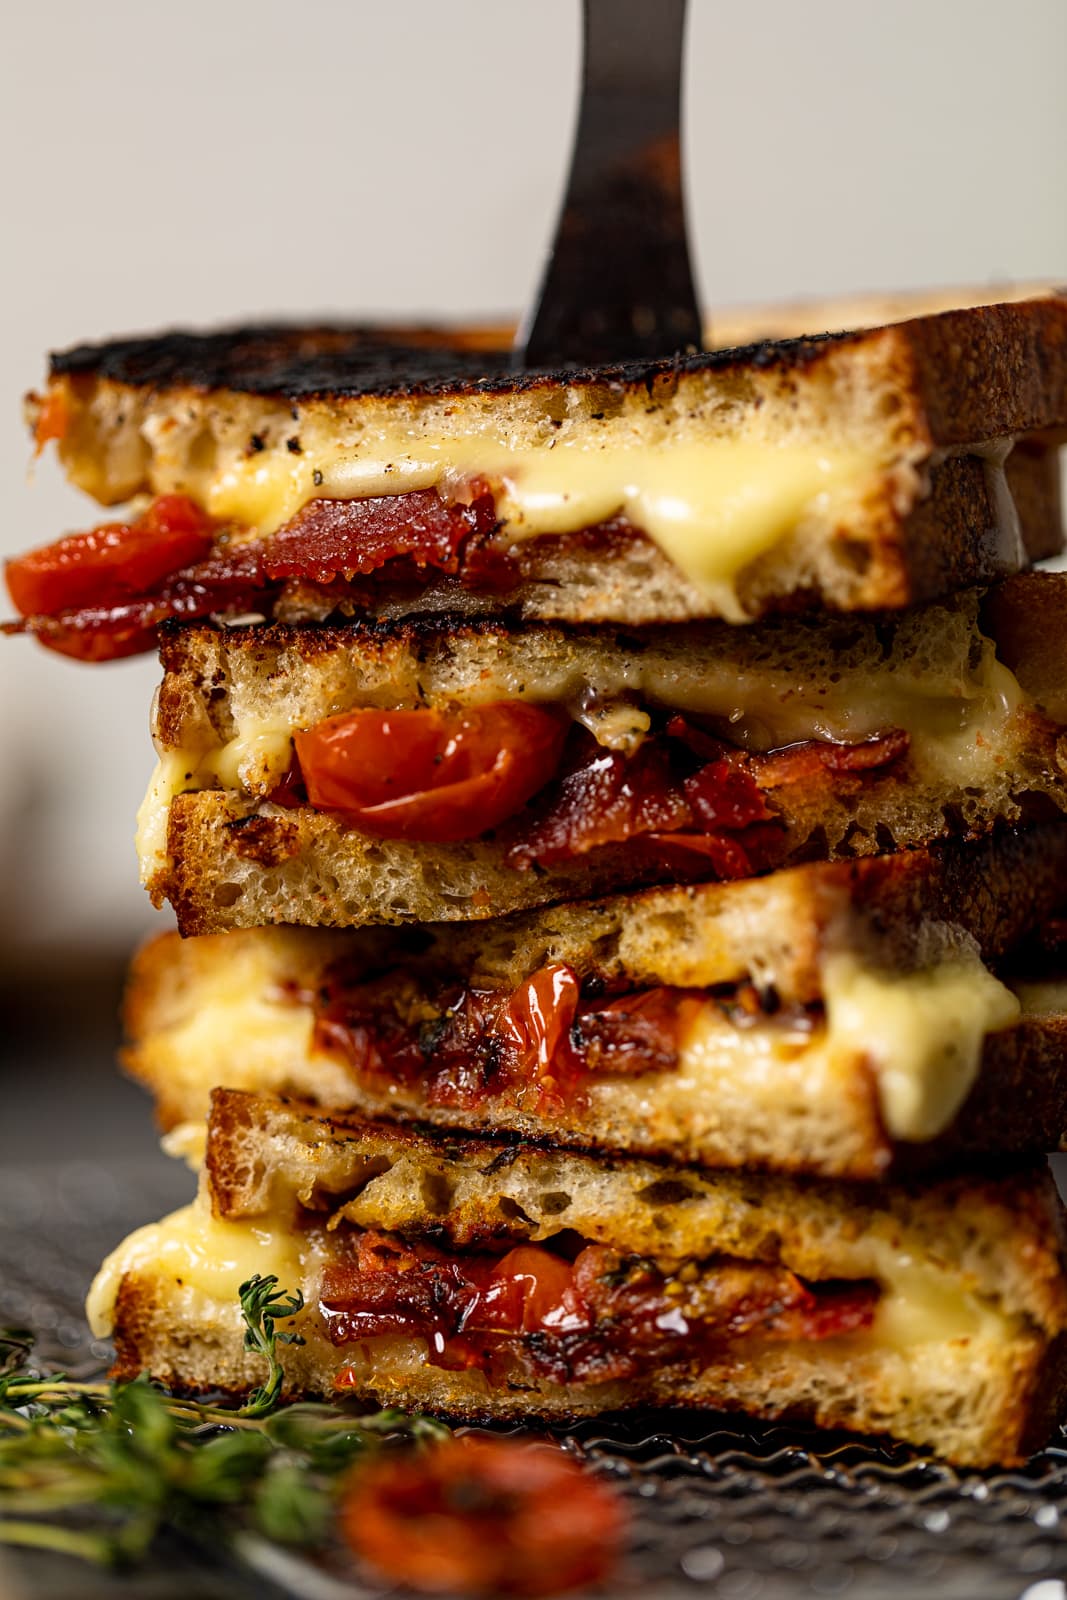 https://www.orchidsandsweettea.com/wp-content/uploads/2022/04/Grilled-Cheese-w-Bacon-n-Tomatoes-6-of-9.jpg